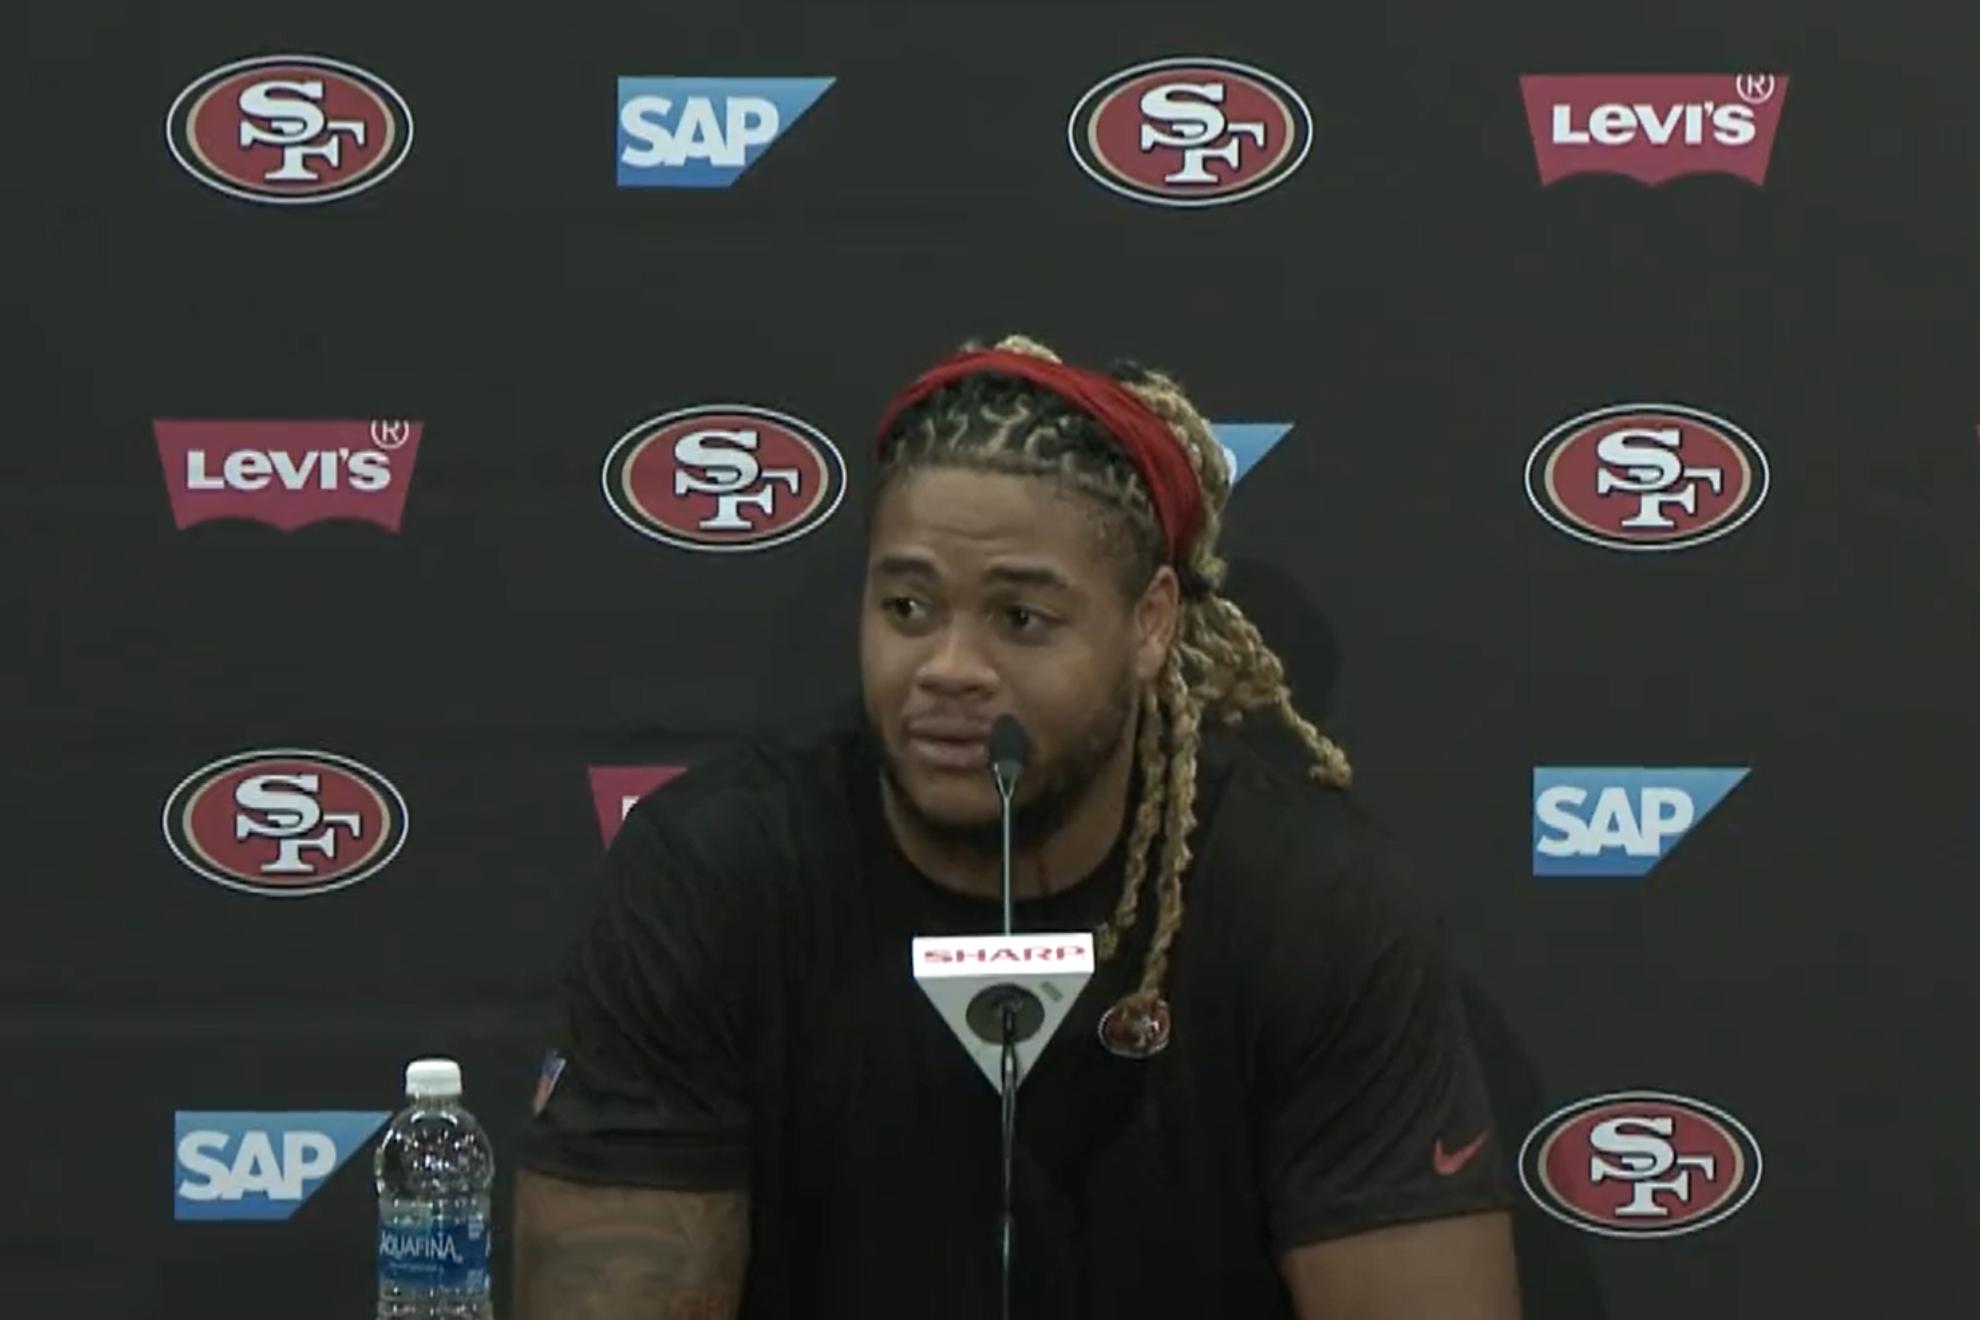 Young talked to the media with excitement about what it means to be a Niner